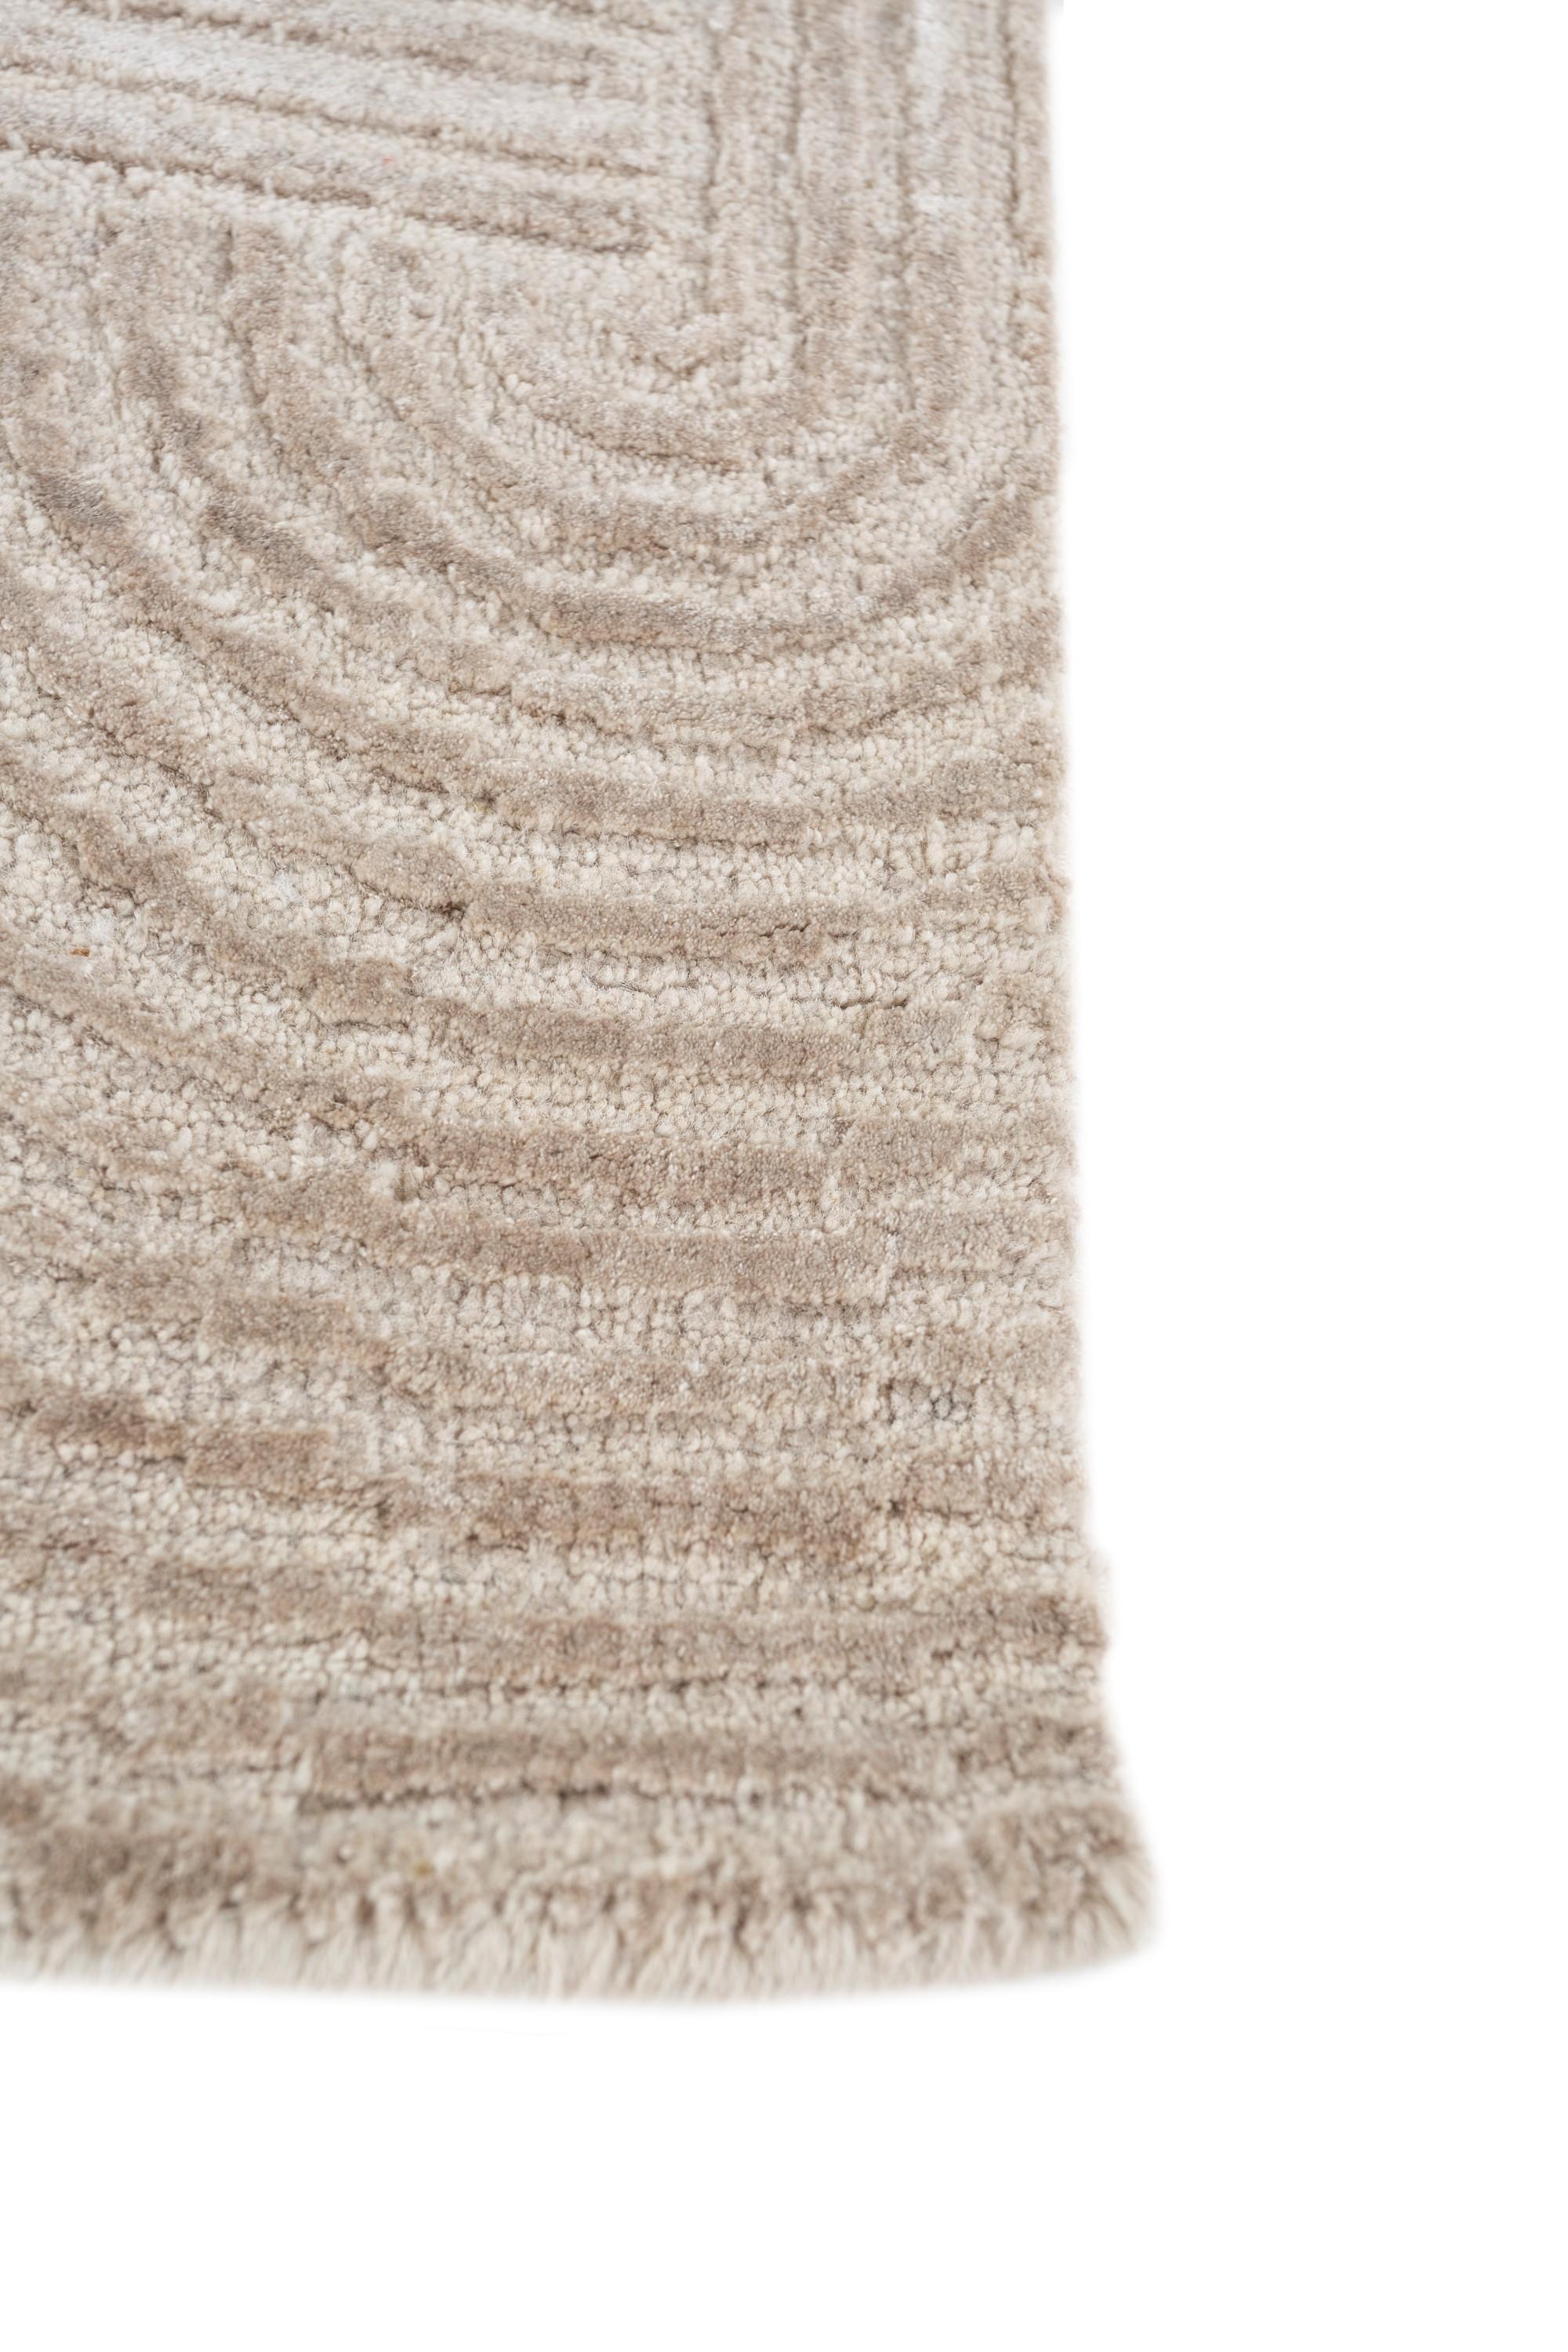 Modern Sun-Kissed Bliss Antique White & White Sand 130X130 cm Handknotted Rug For Sale